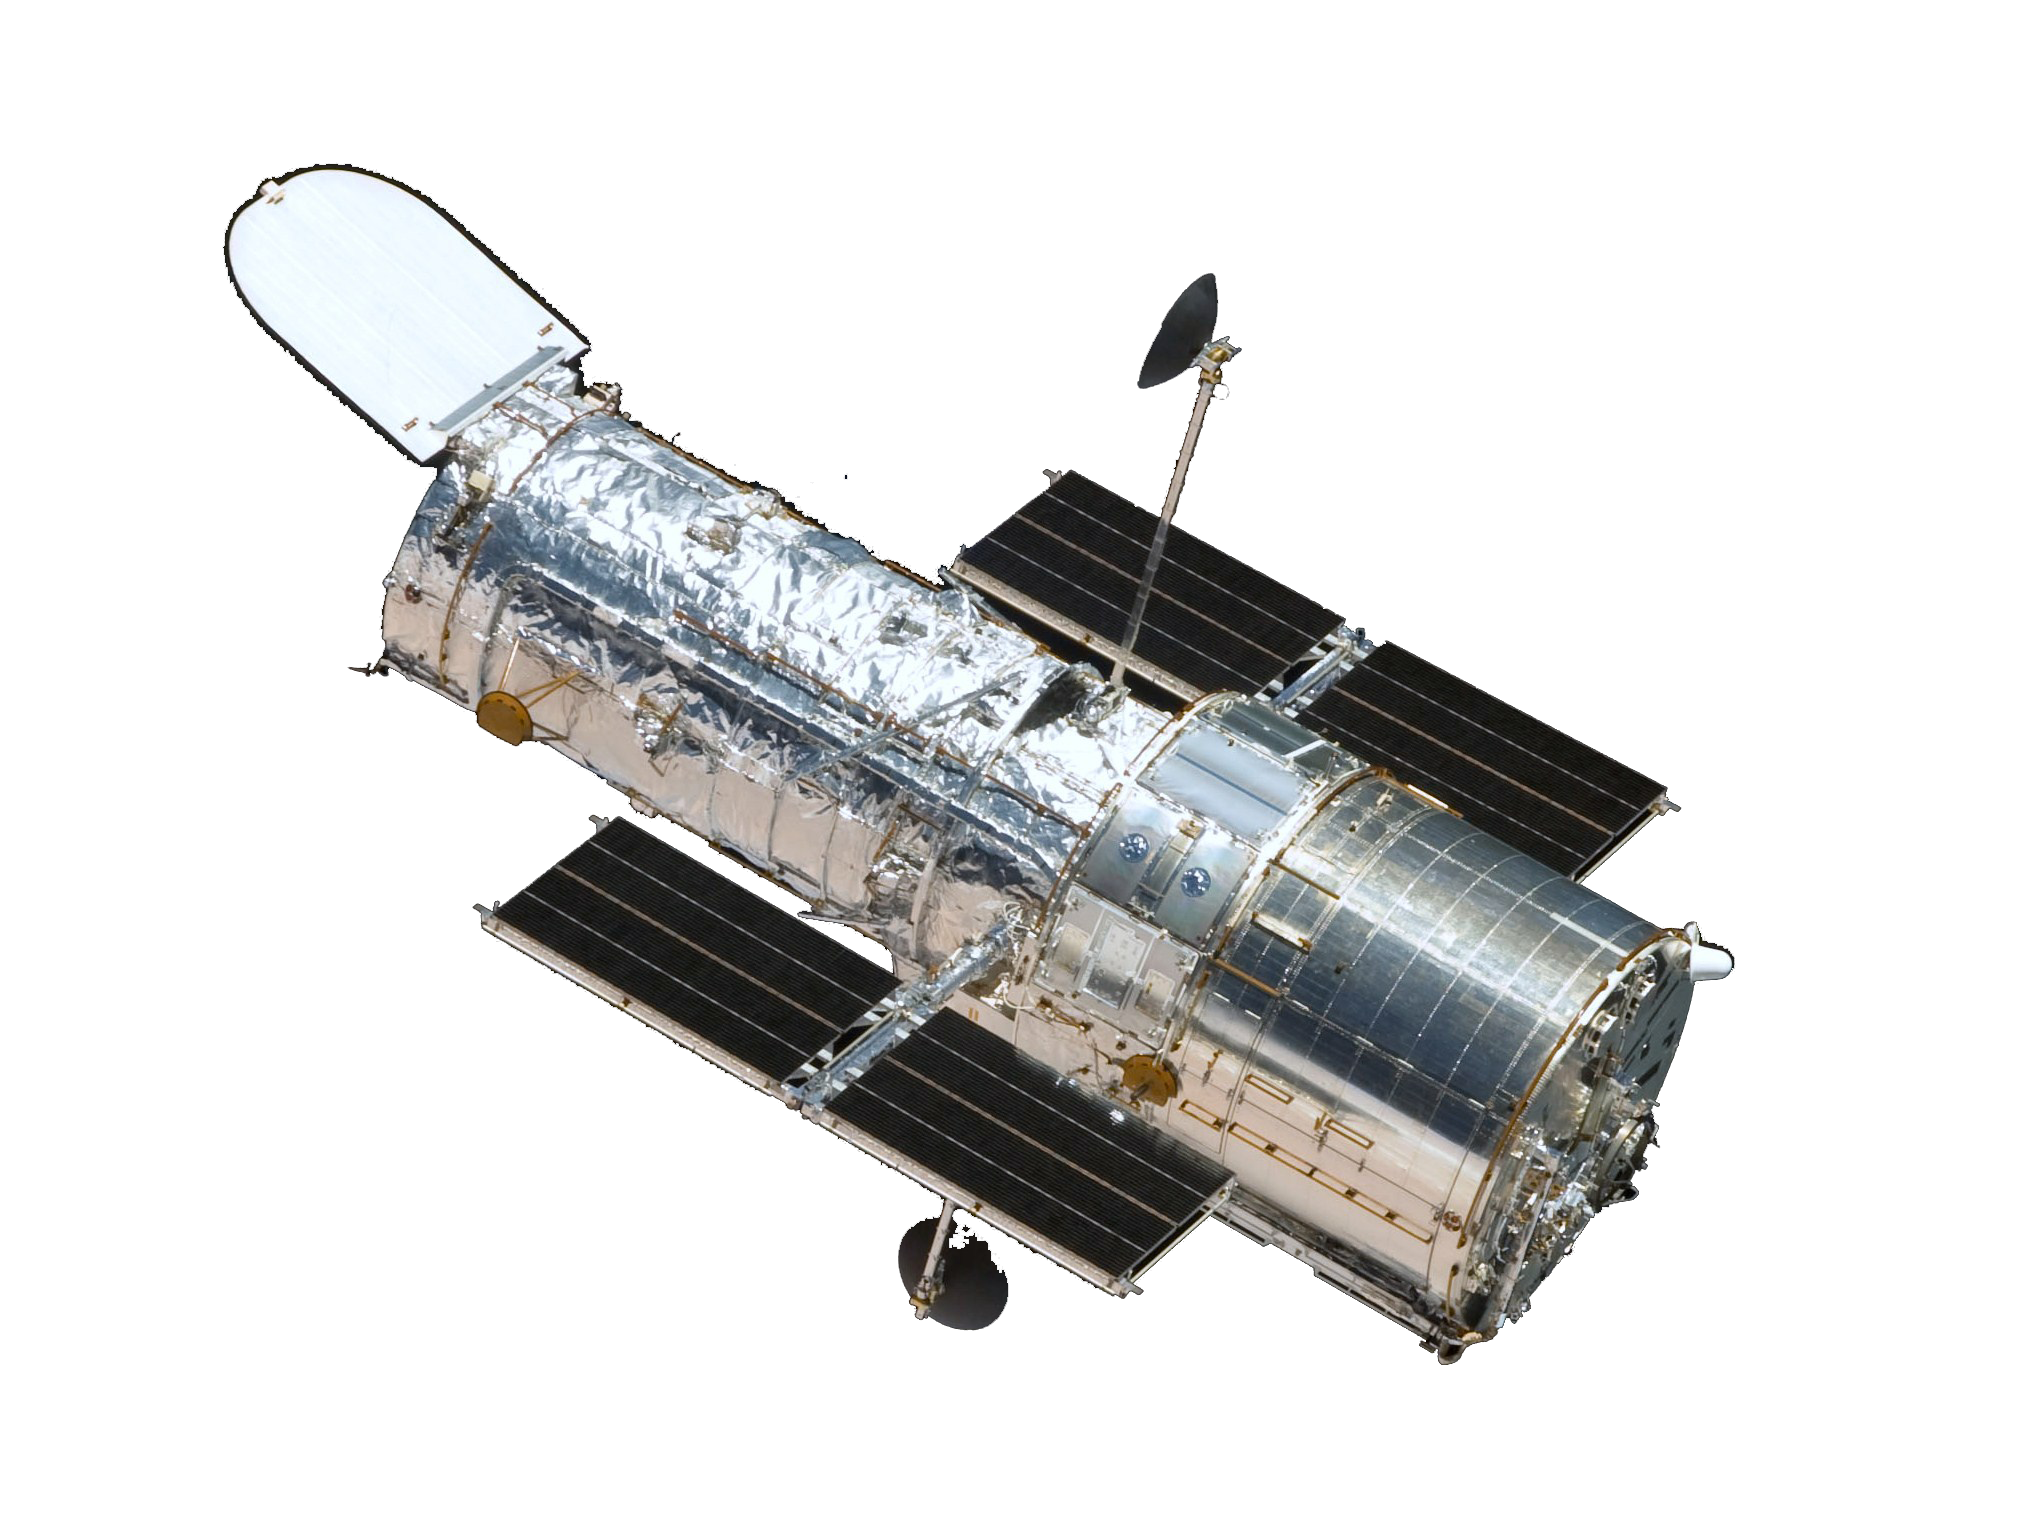 a photo of the Hubble Space Telescope spacecraft